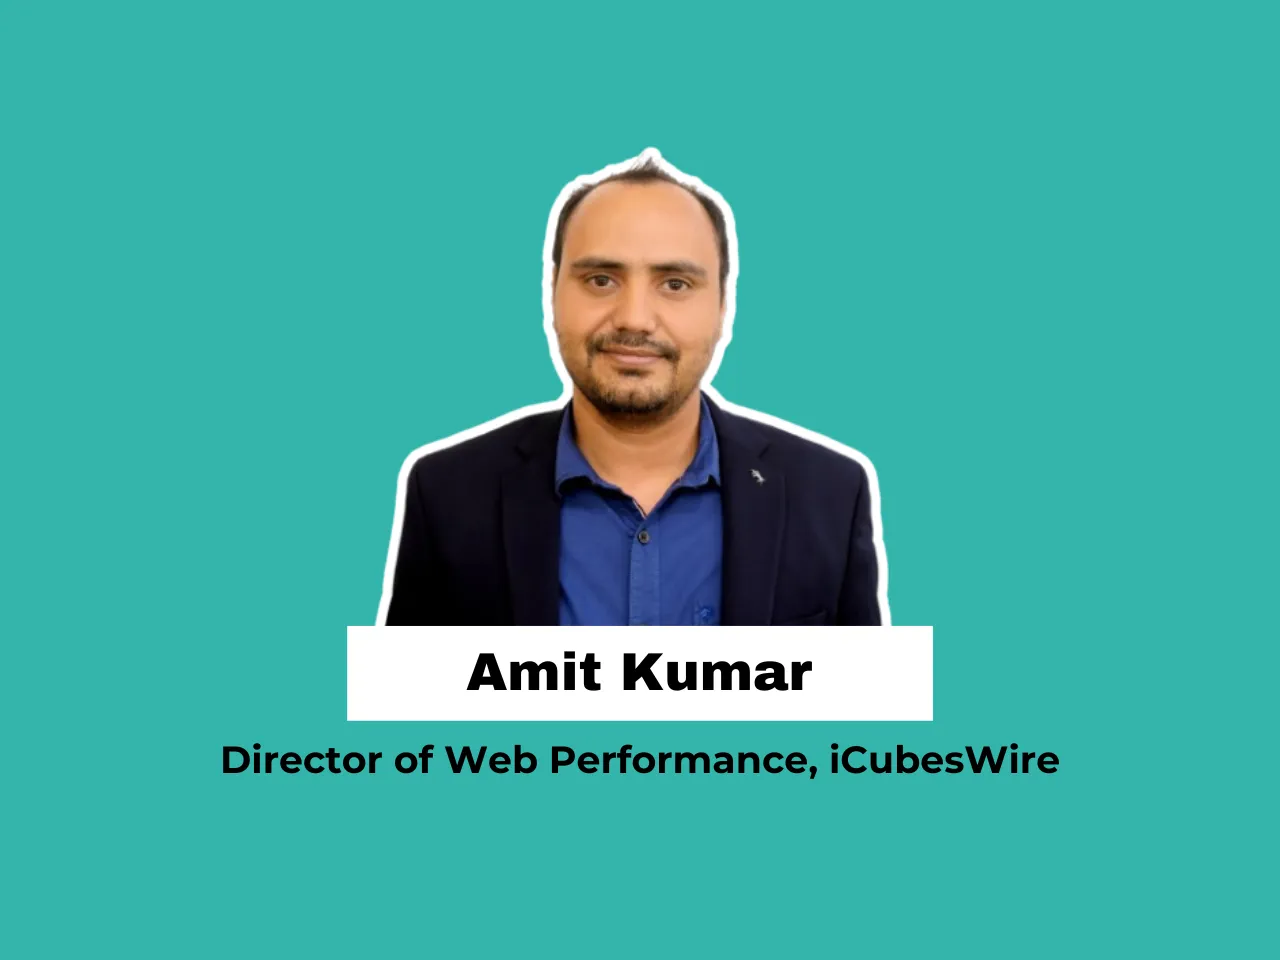 Amit Kumar elevated to Director of Web Performance at iCubesWire